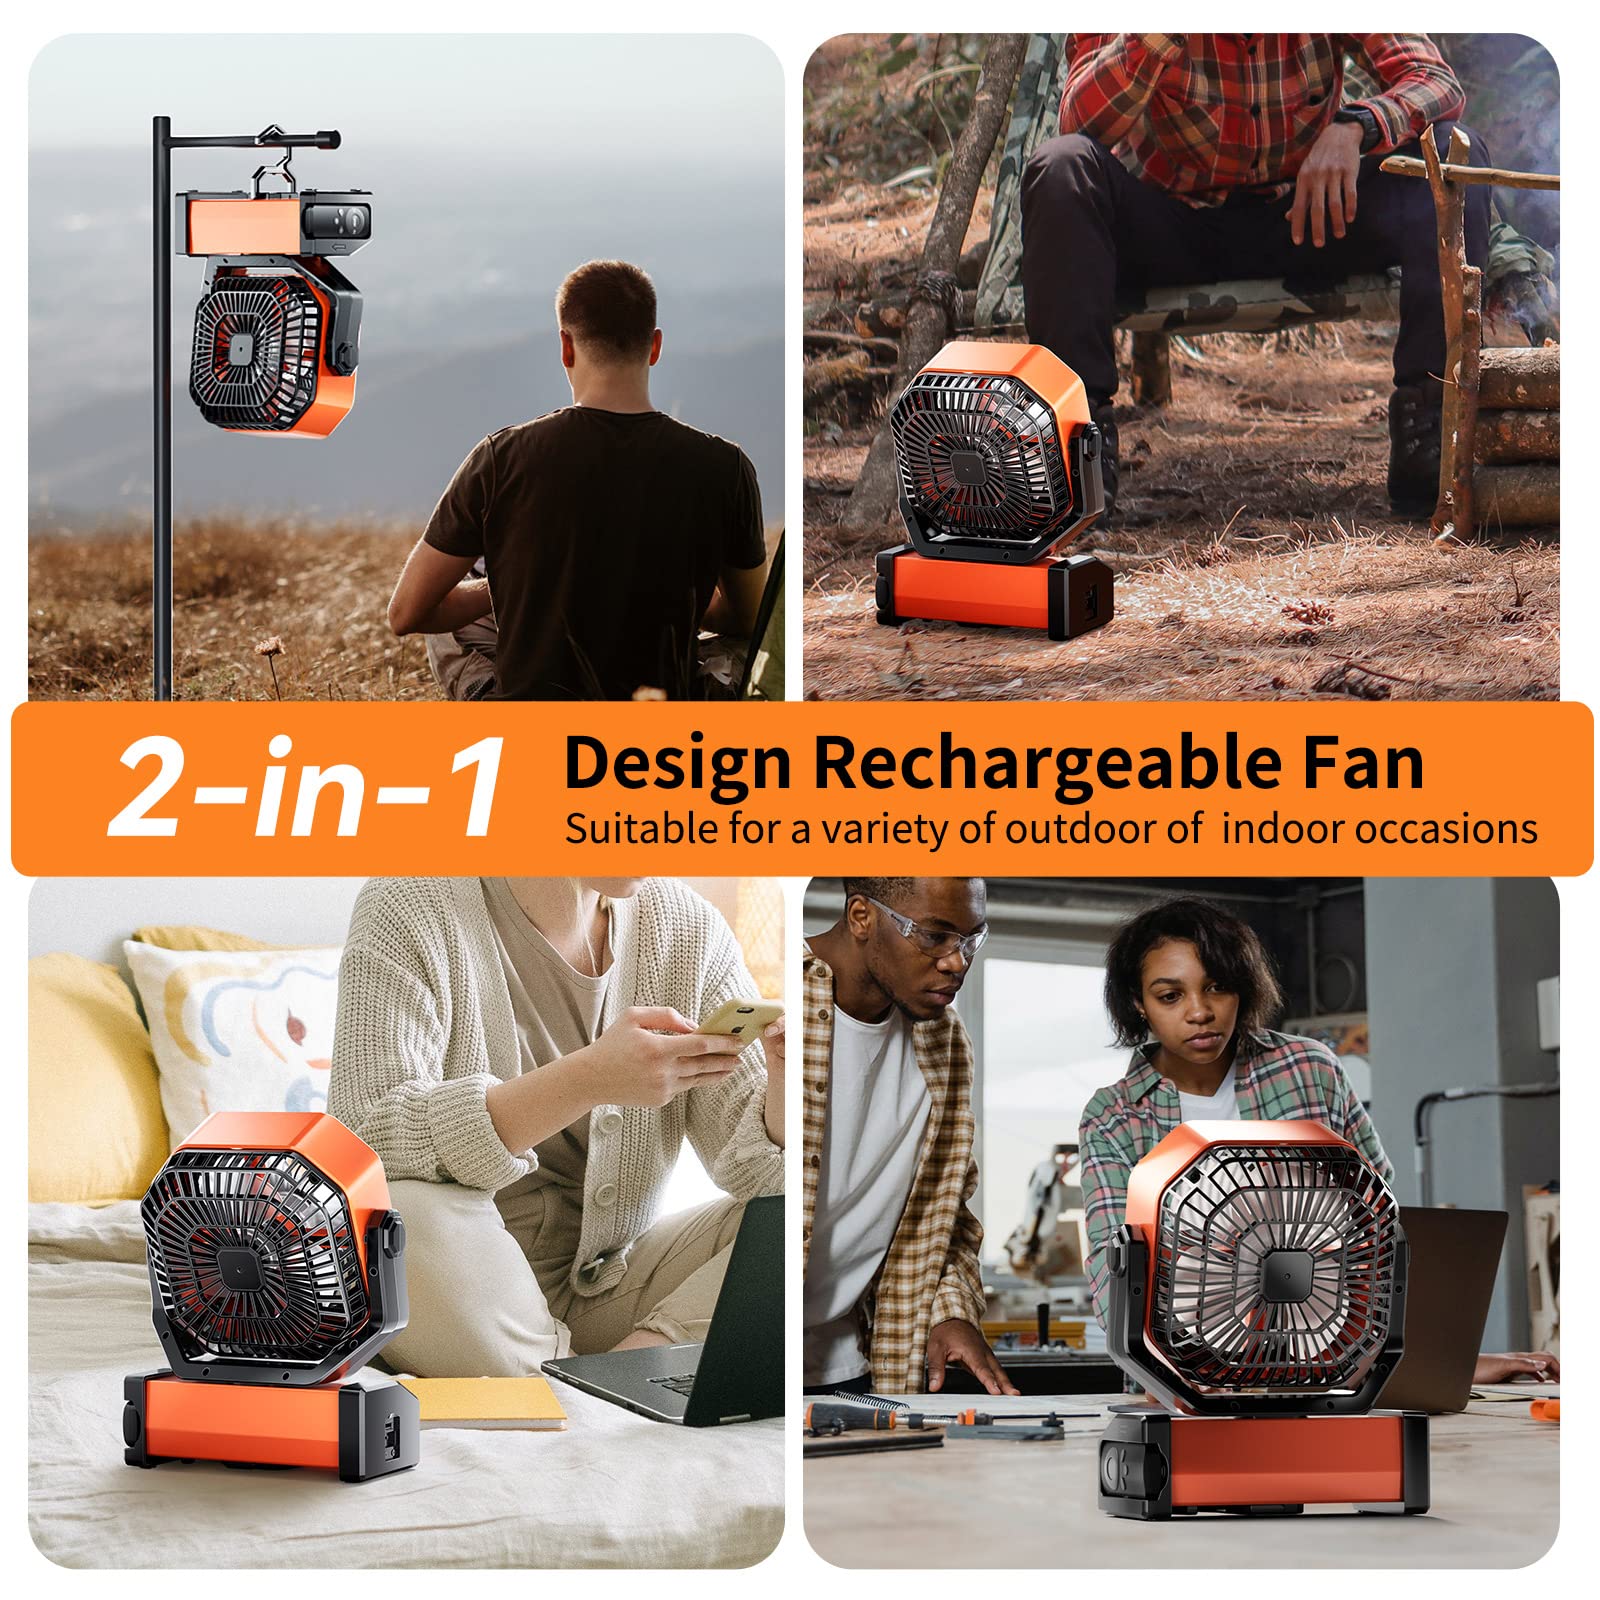 Camping LED Fan with Light, 20000mAh Rechargeable Battery Powered Outdoor Tent Fan with Light and Remote, 4 Speed, Personal USB Desk Fan for Camping, Fishing,Power Outage,Hurricane, Worksite